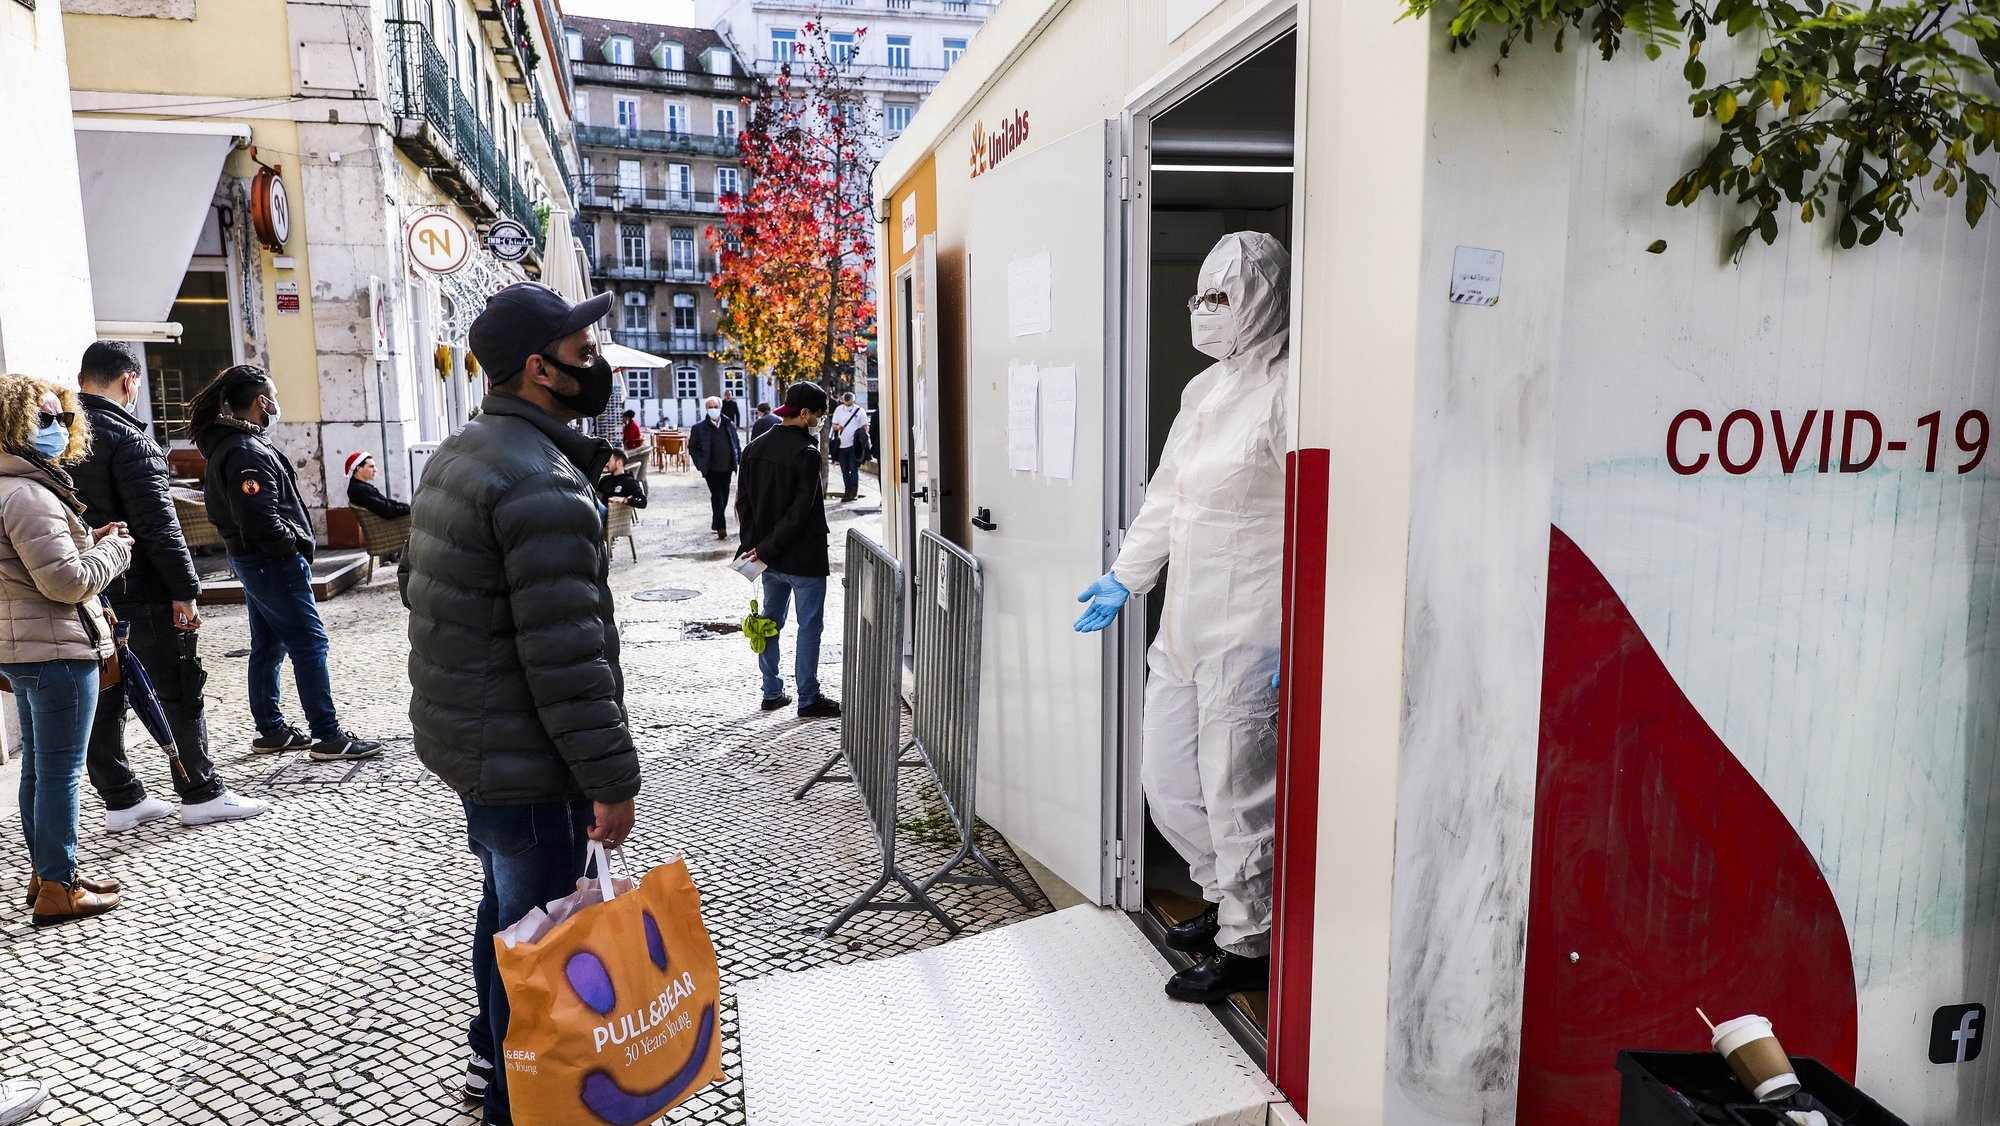 A health worker talks to a unidentified man in a Covid-19 Walk Thru station in Lisbon downtown where people can take a SARS-CoV-2 antigen test. Portugal, which has one of the world&#039;s highest rates of vaccination against COVID-19 with around 87% of its 10 million population fully inoculated, is facing a surge in infections along with the rest of Europe, in part due to the fast-spreading Omicron variant. MIGUEL A. LOPES/LUSA